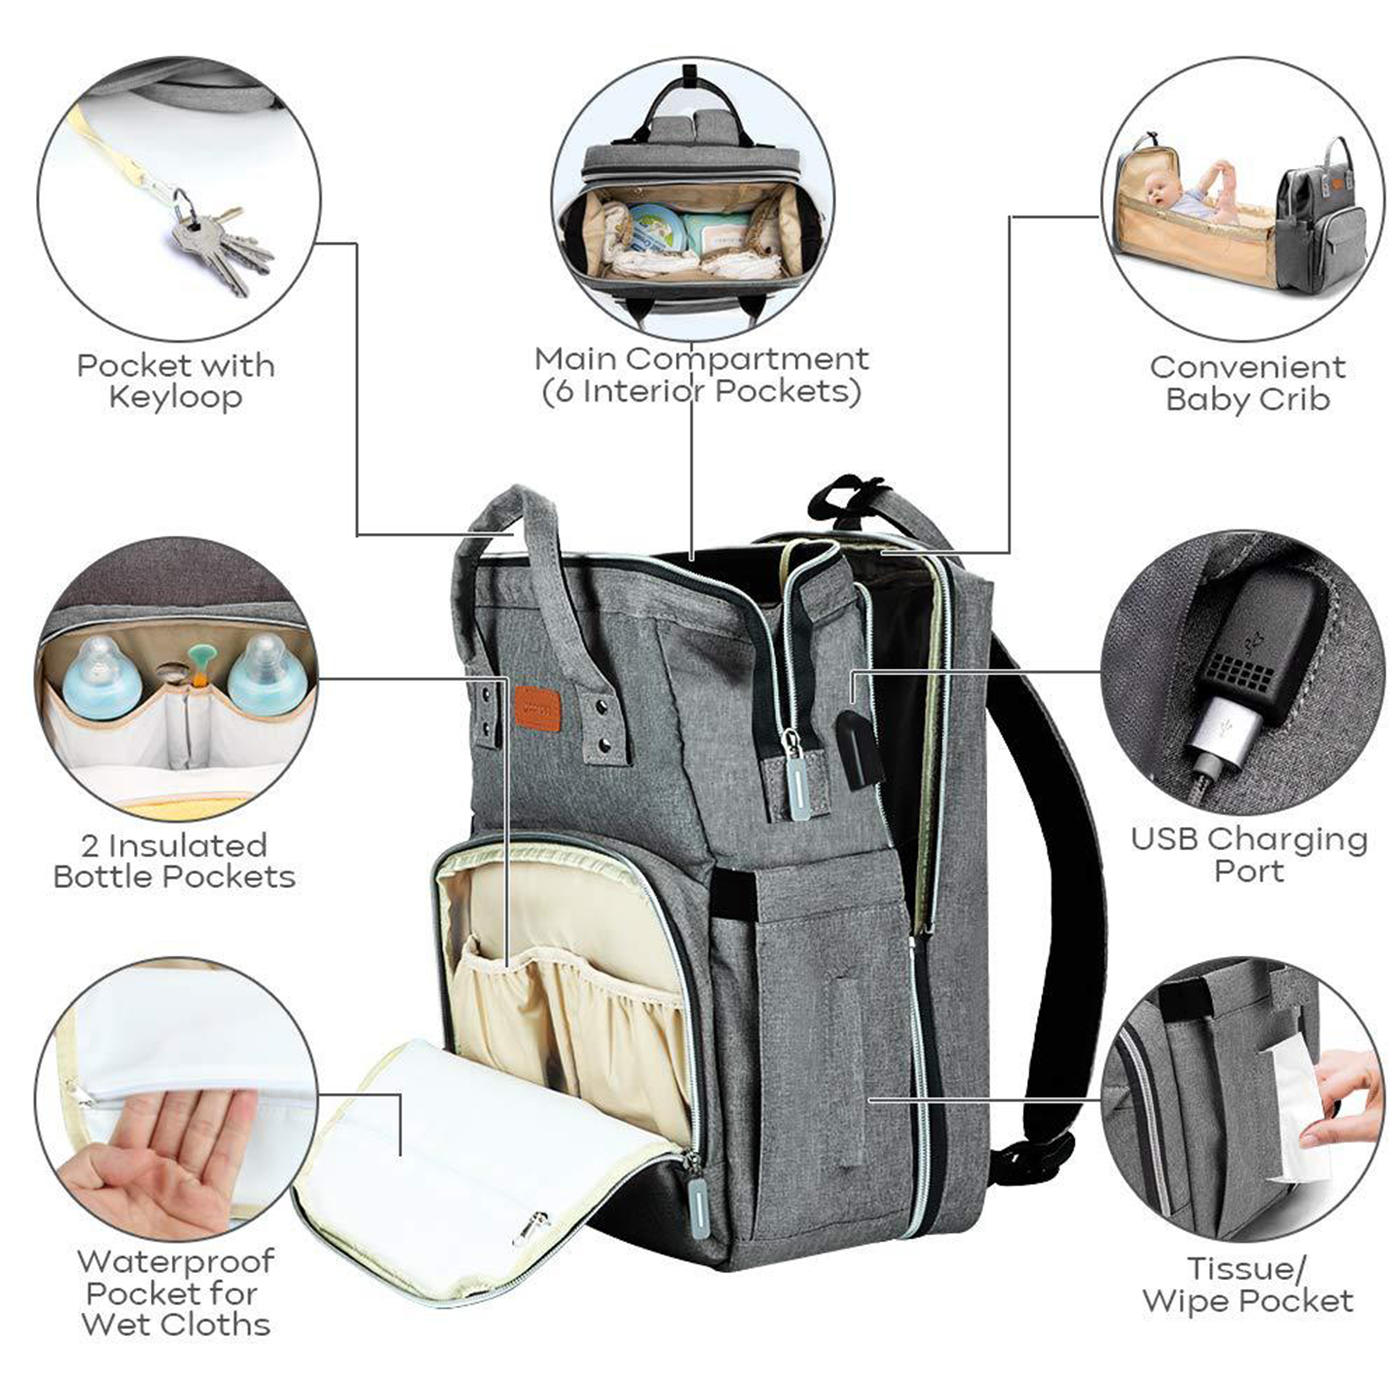 Foldable Baby Backpack With Crip3